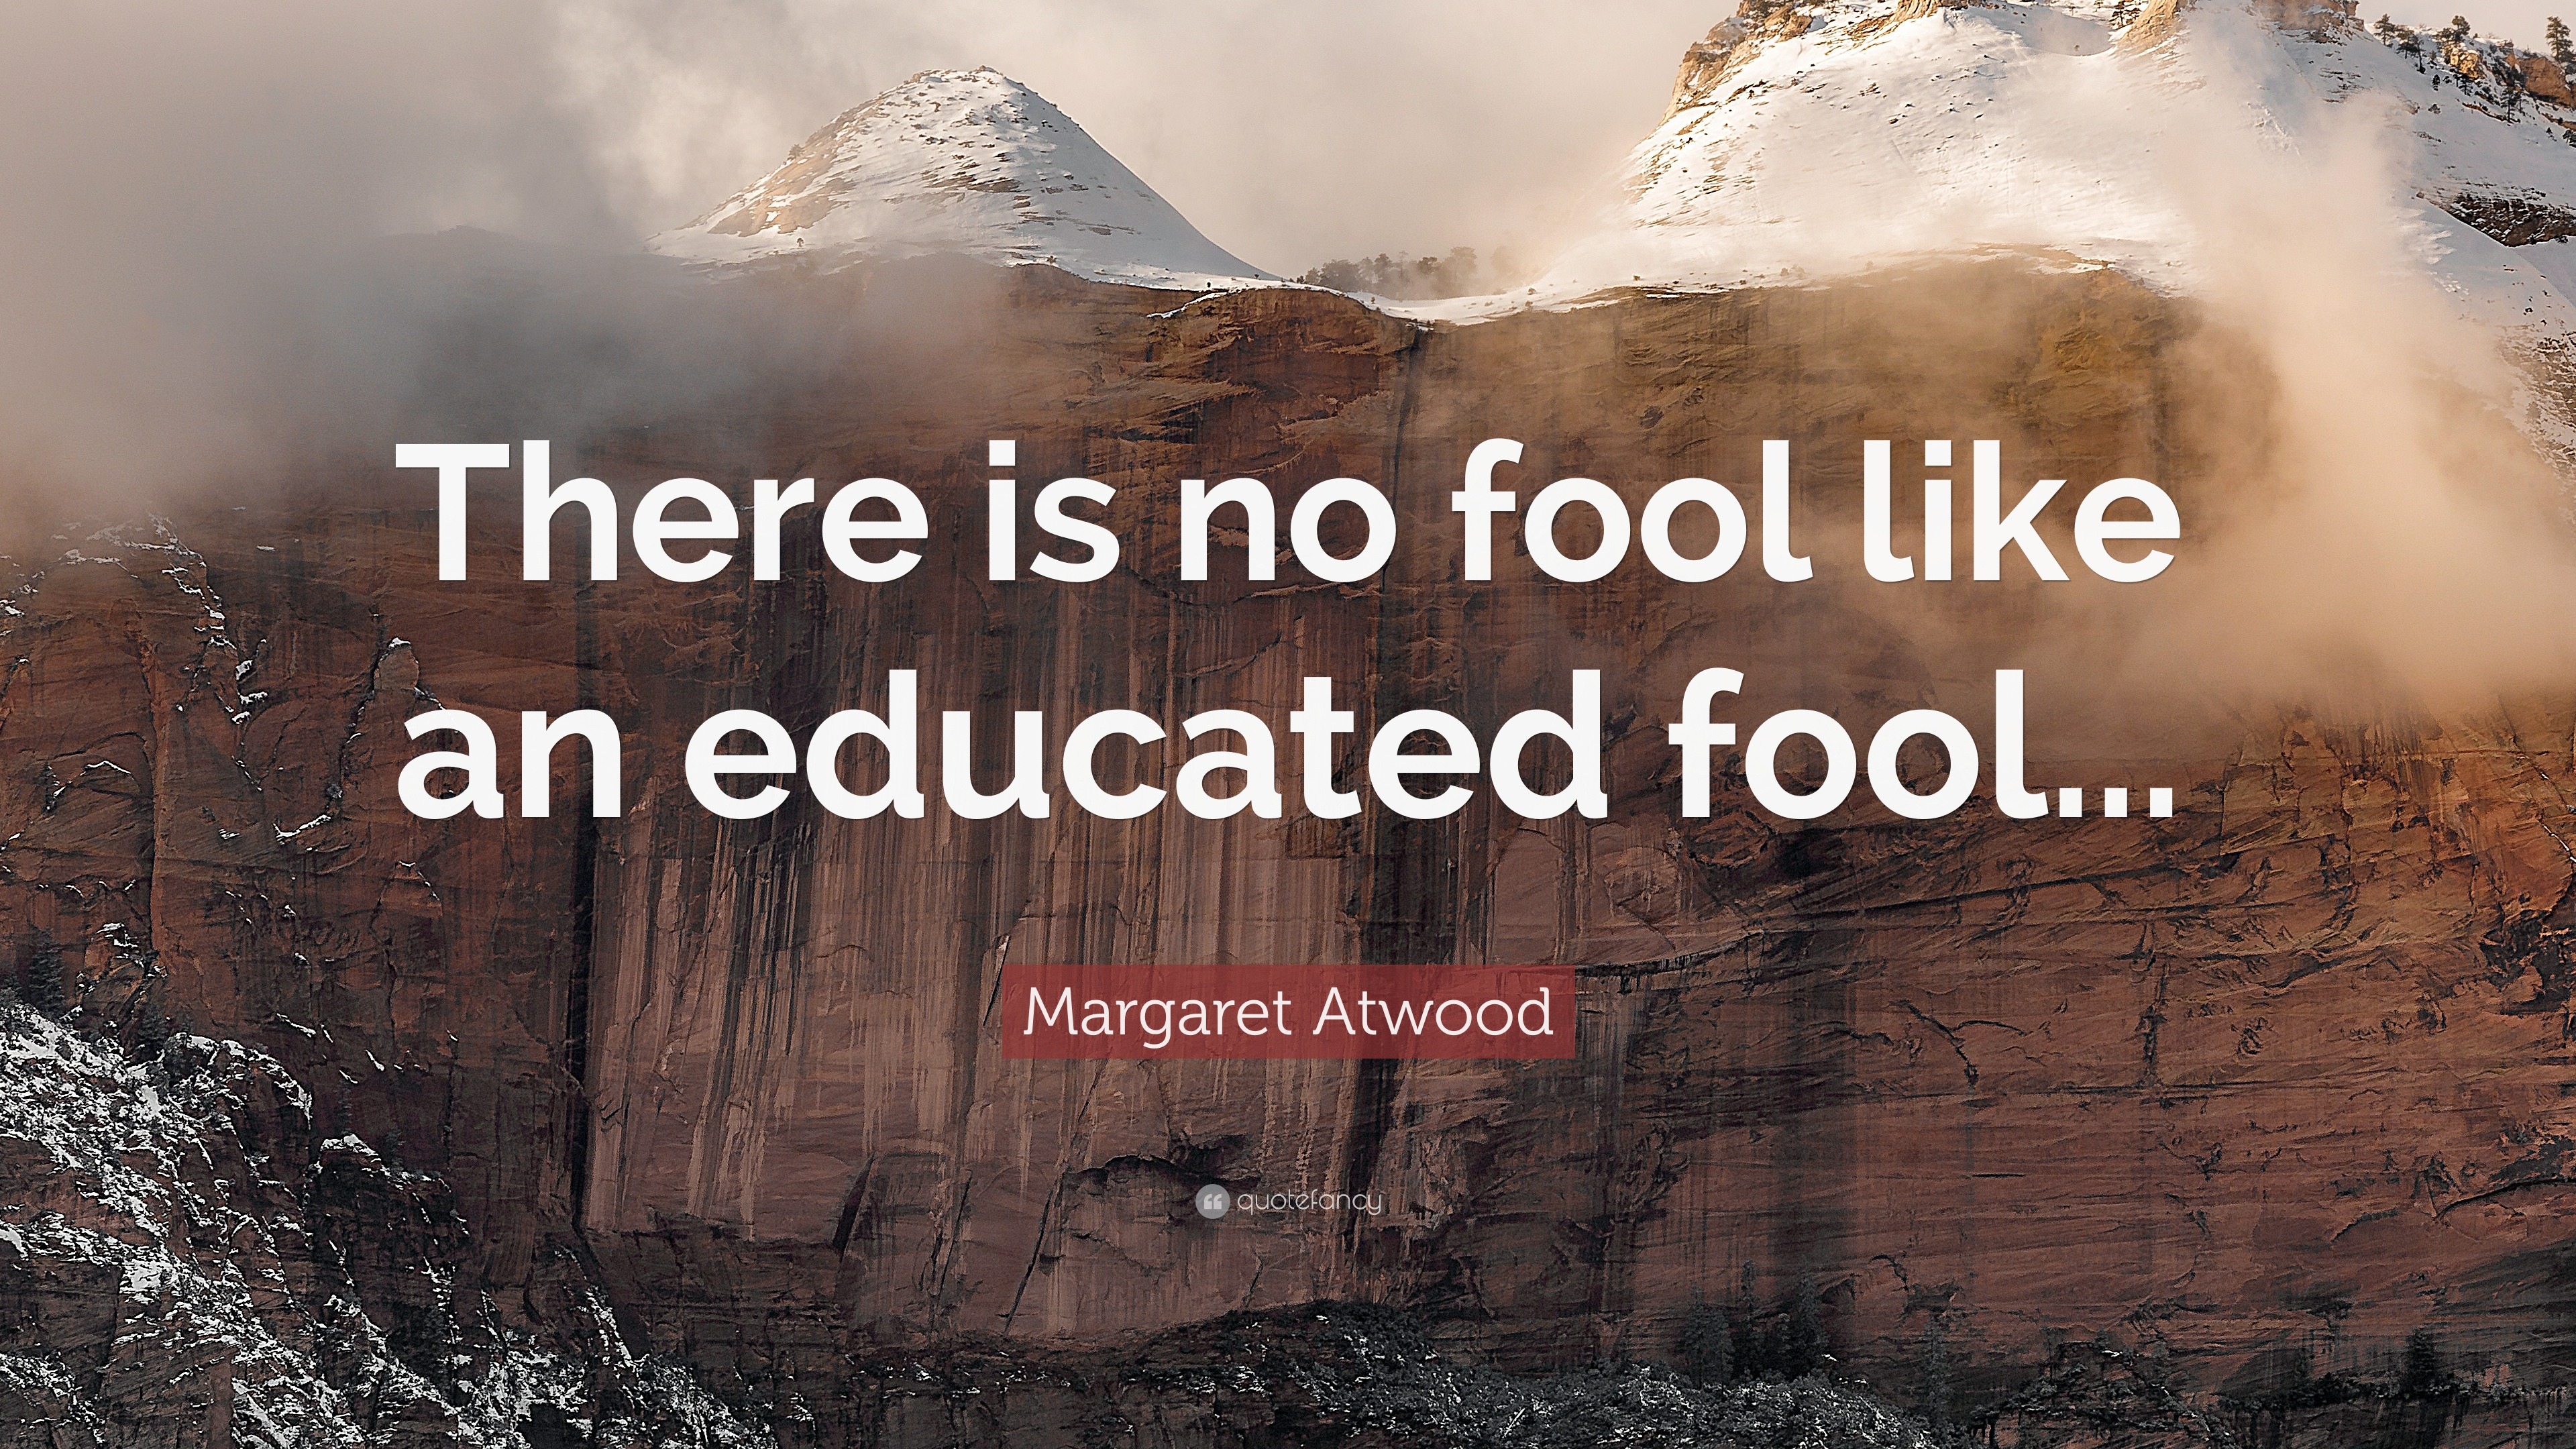 Margaret Atwood Quote “there Is No Fool Like An Educated Fool ”